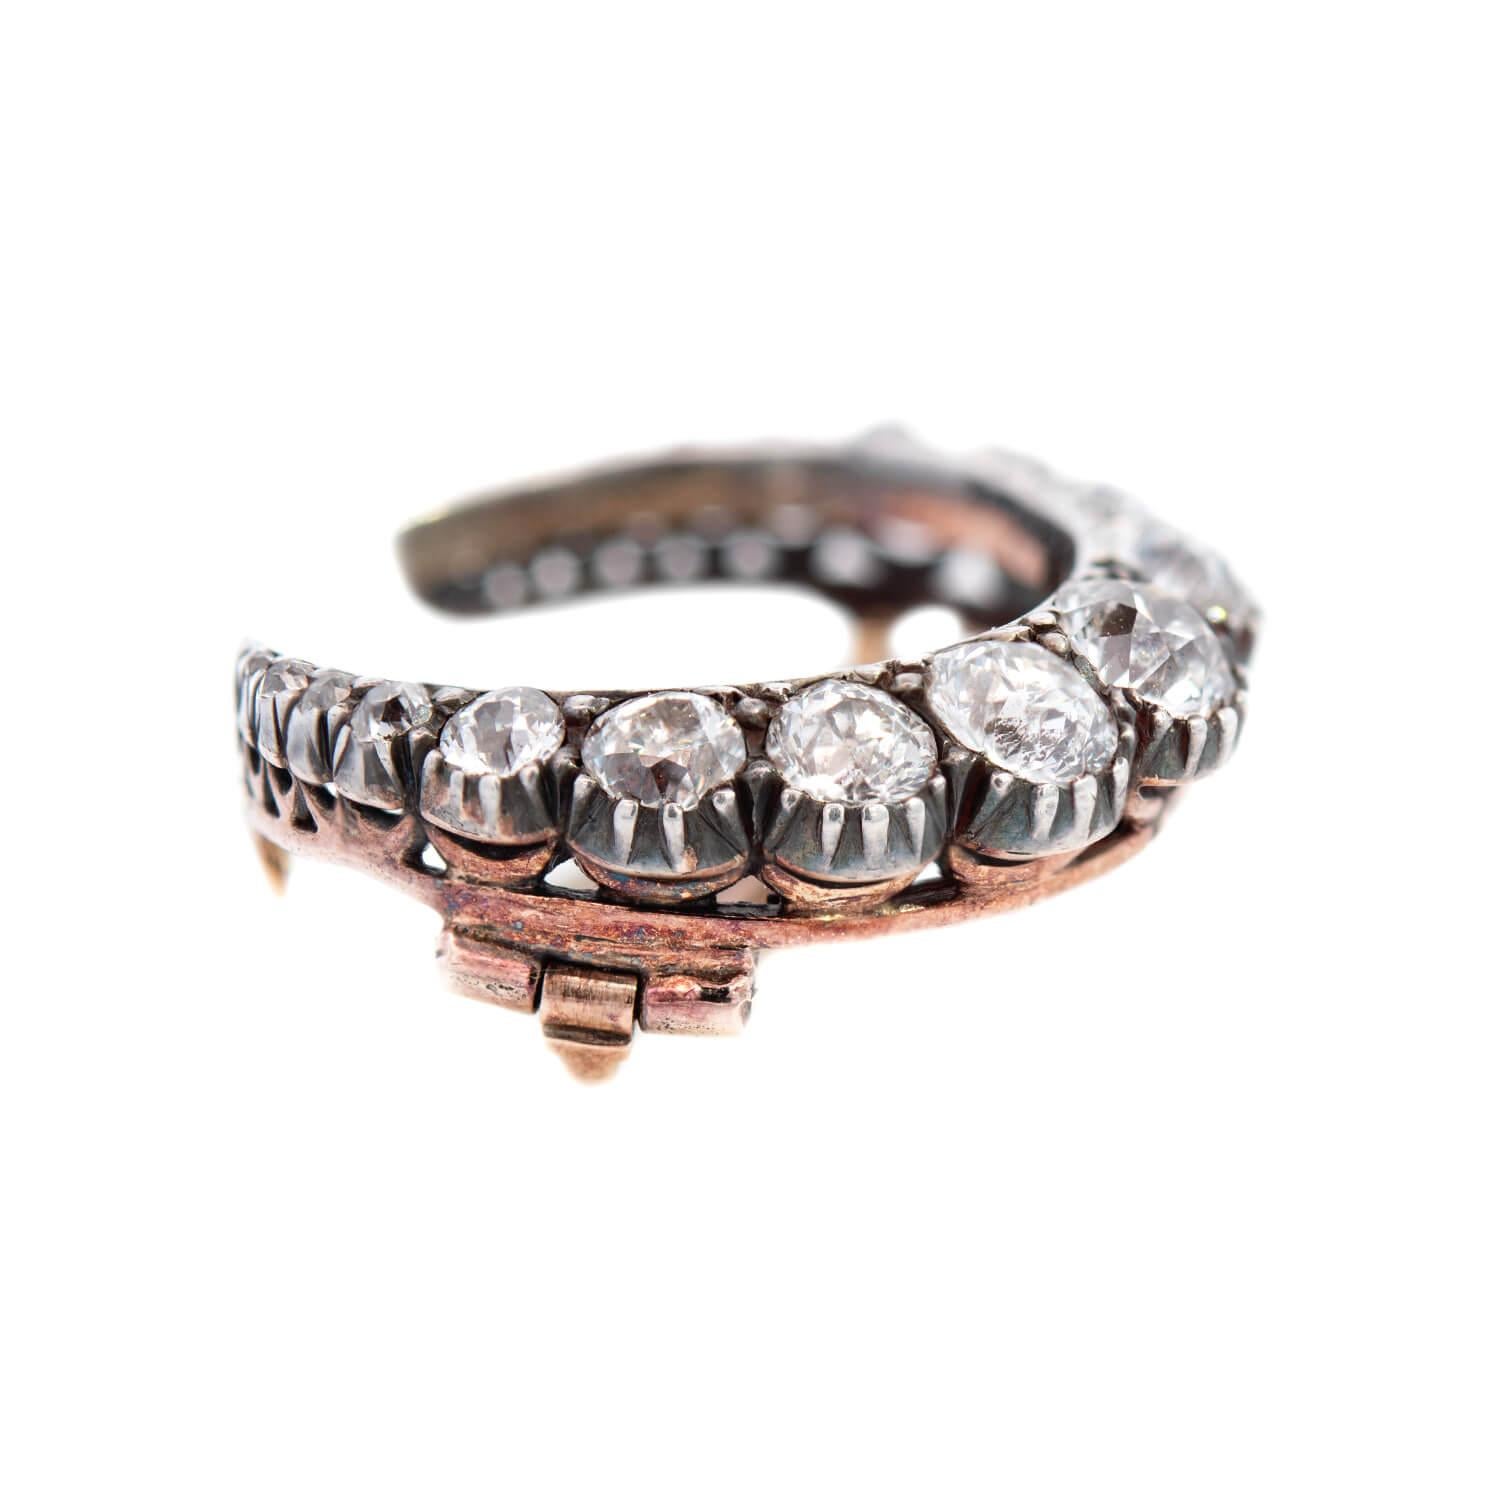 Founded in 1866 by Sir Robert Inches and James Hamilton, Hamilton & Inches has been crafting high quality luxury jewelry in Edinburgh, Scotland, for well over a century up to the current day. They have been lauded for their skilled craftsmanship